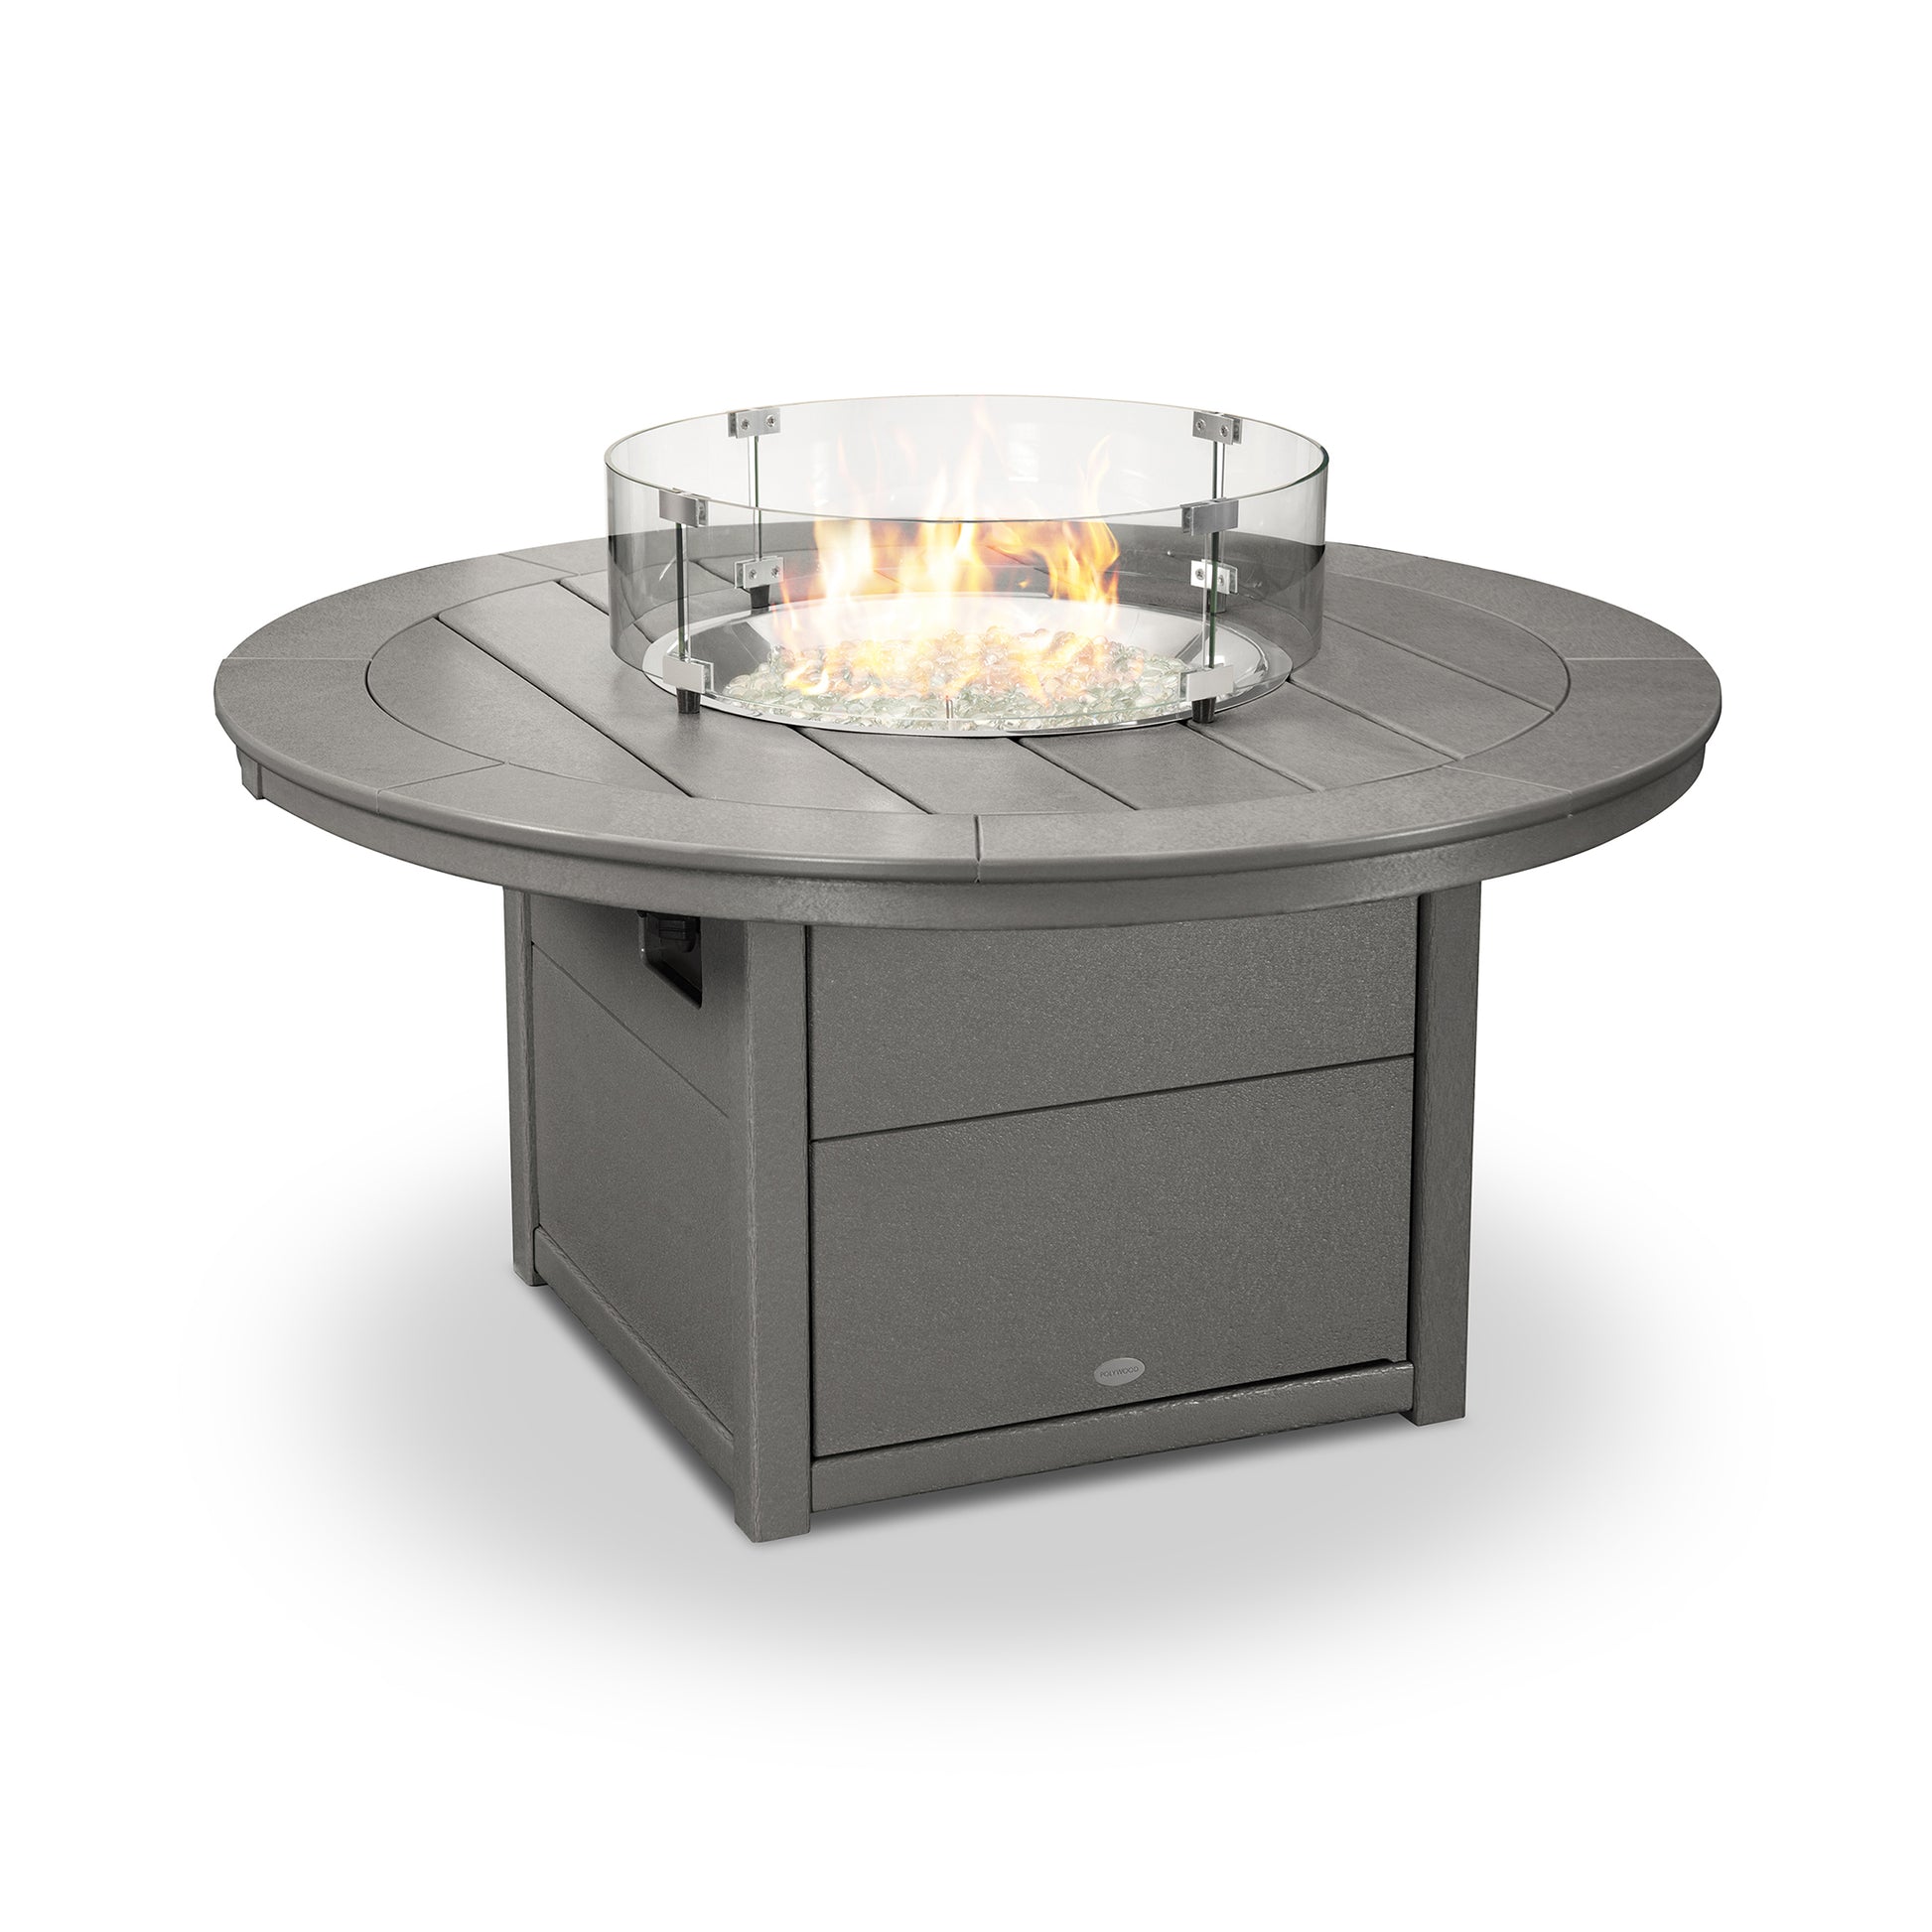 A round, gray POLYWOOD Round 48" Fire Pit Table outdoor fire pit table with a central flame under a clear glass wind guard on a plain white background.